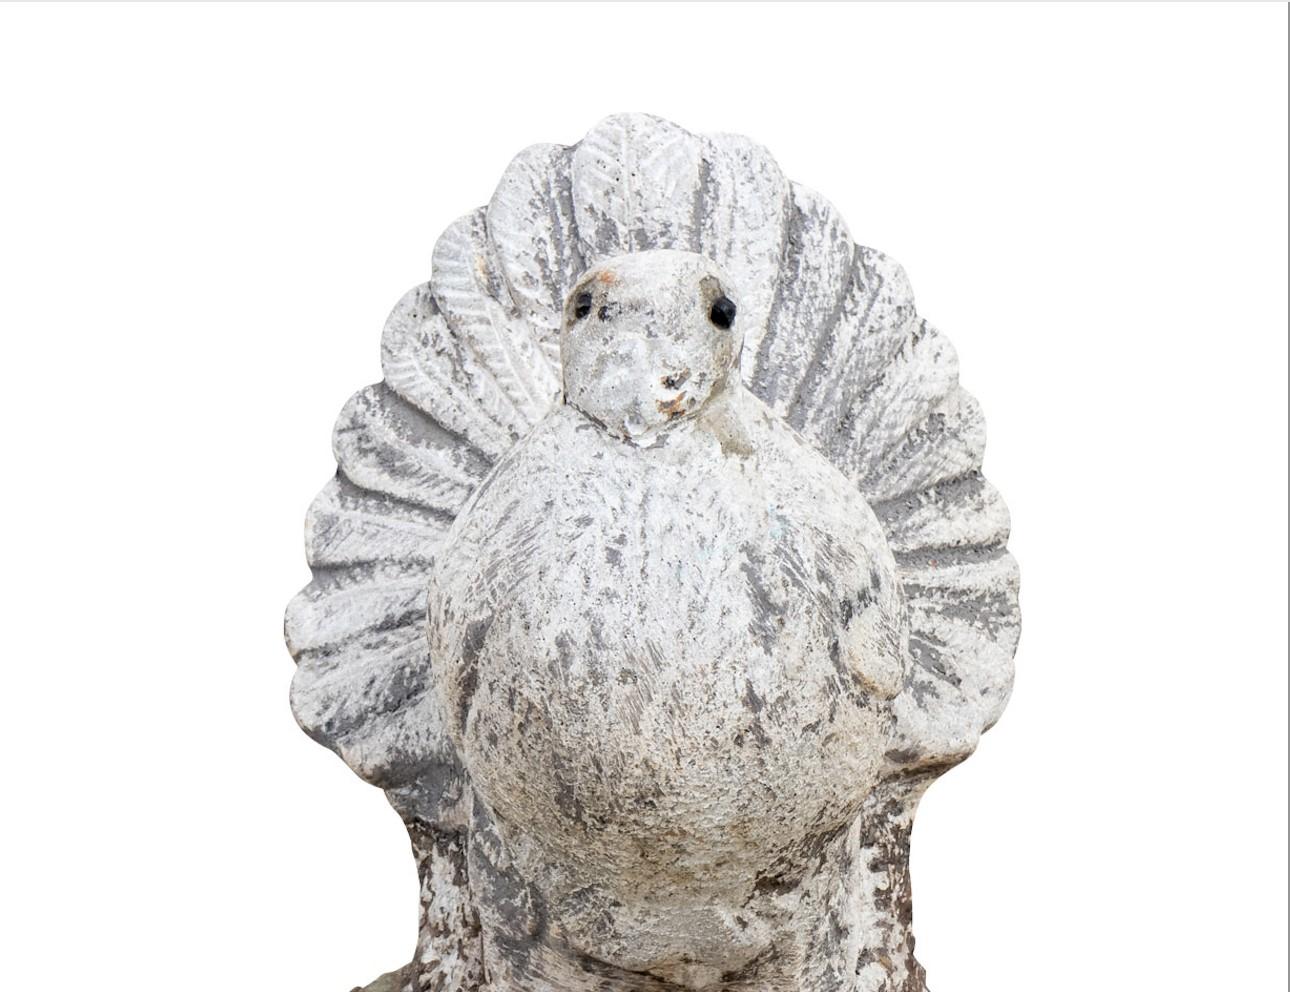 Mid 20th Century reconstituted stone garden ornament in the shape of a dove. Lovely detail on the robust tail feathers. Remnants of the original white paint. Please note of wear consistent with age. 6.5